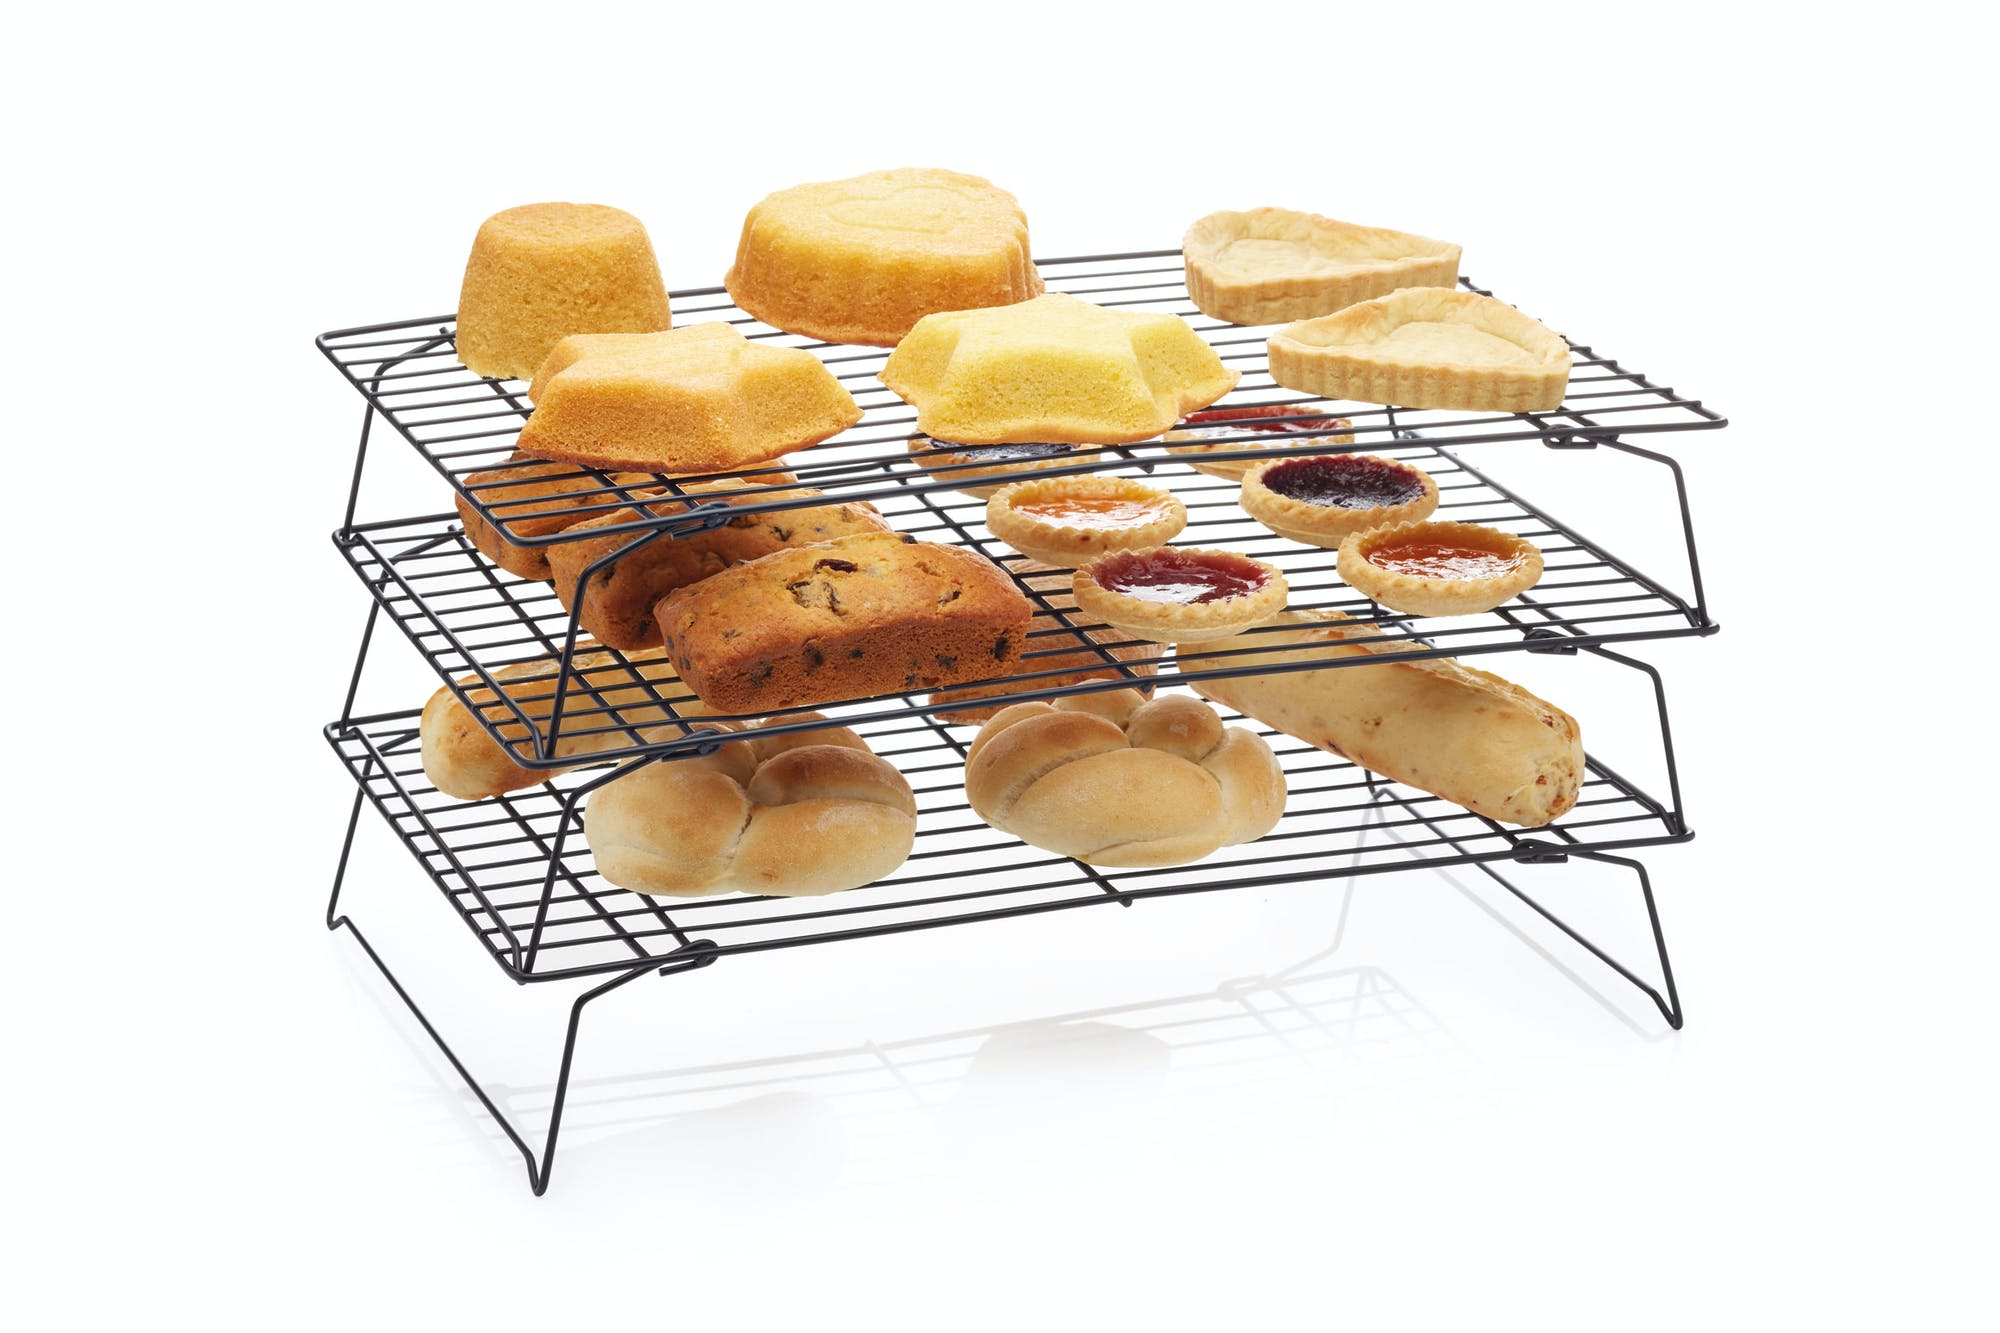 Carbon Steel Wire Grid Cooling Tray Oven Kitchen Baking Pizza Bread  Barbecue Cookie Biscuit Holder Shelf Cake Food Rack - AliExpress